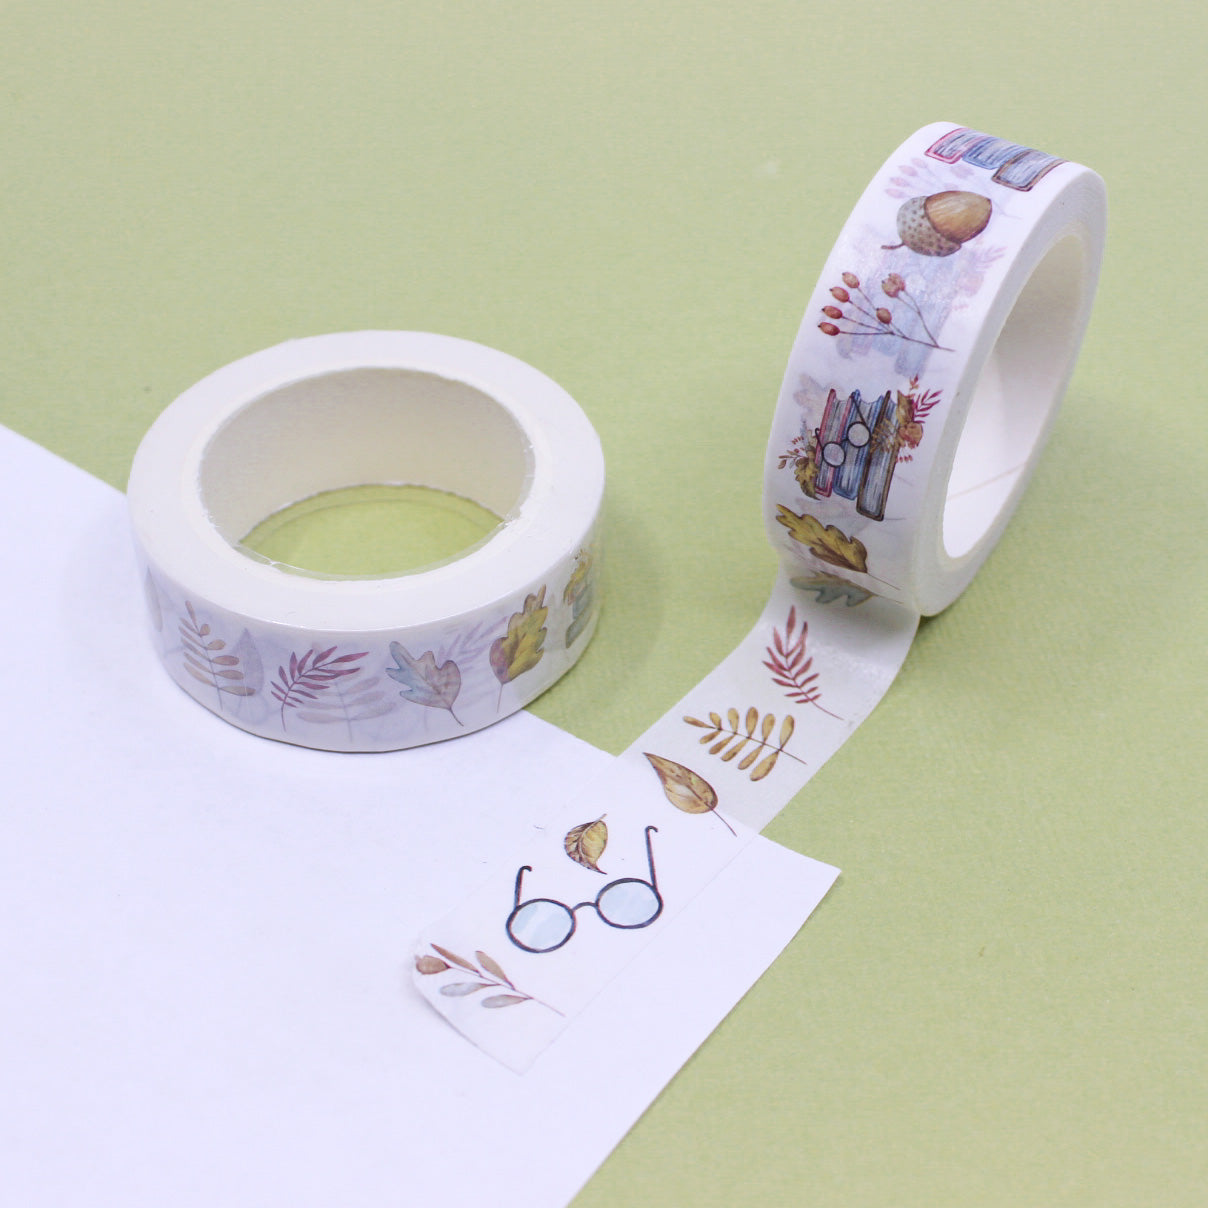 This washi tape captures the essence of fall with its cozy design featuring books, warm beverages, and autumn leaves, perfect for adding a seasonal touch to your projects. This tape is sold at BBB Supplies Craft Shop.